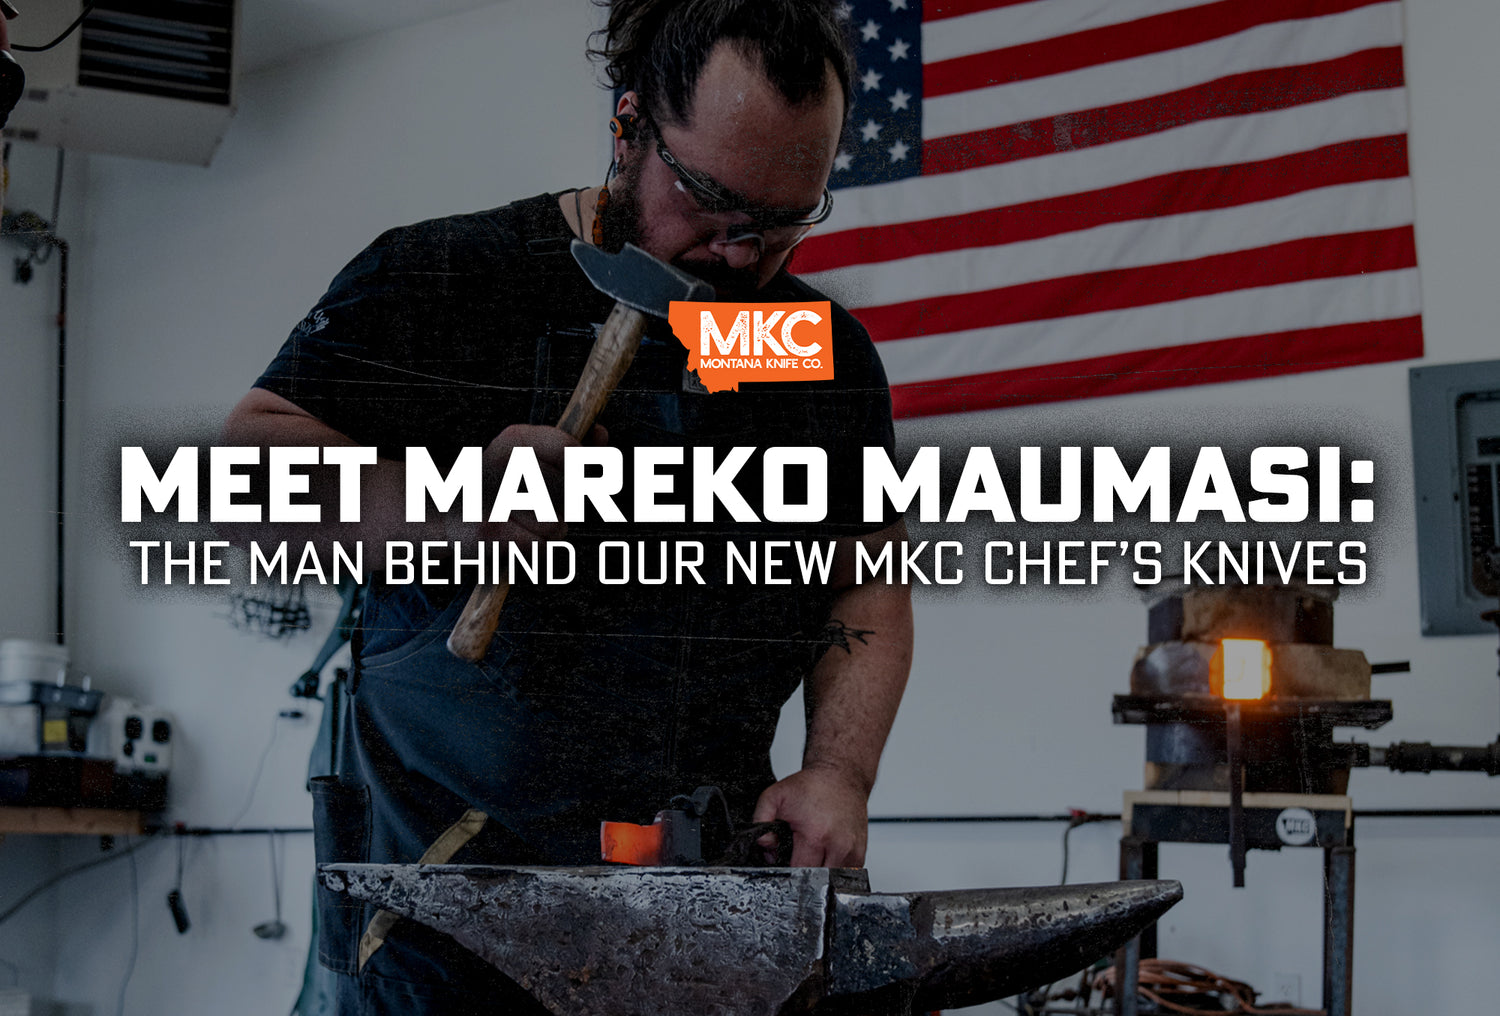 Mareko Maumasi working on chef's knives at a worktable.